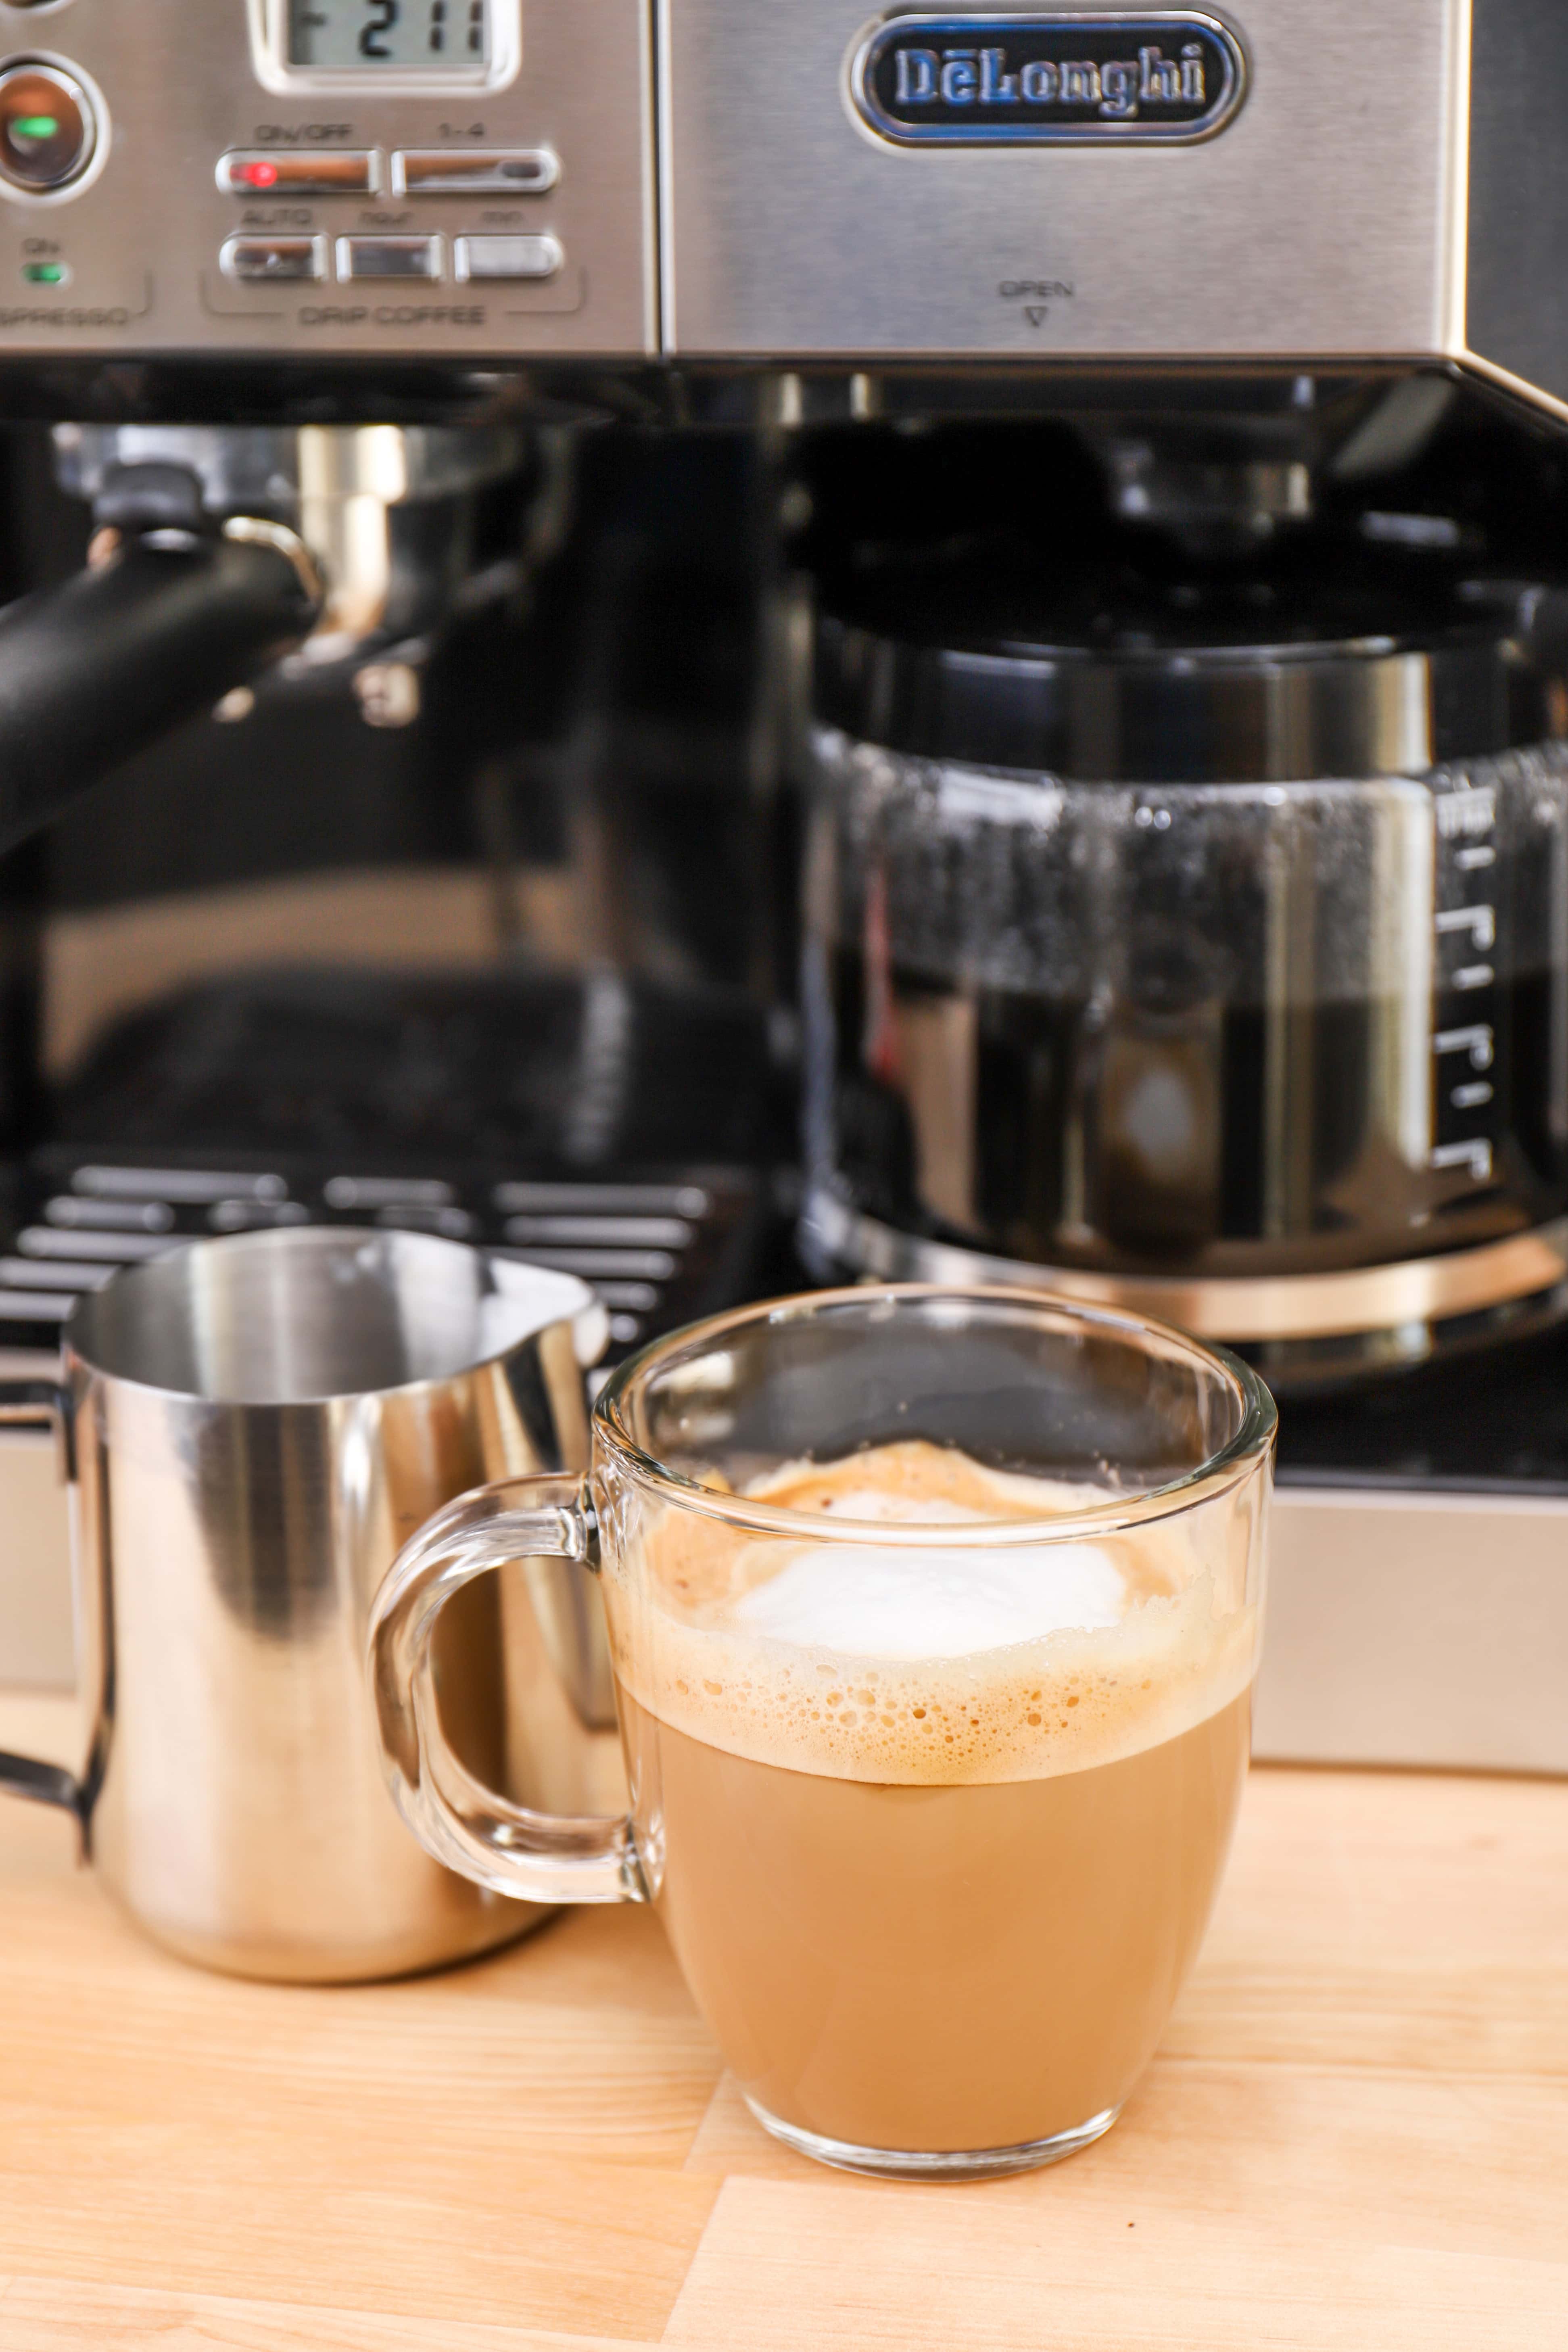 De'Longhi All in One Machine with espresso drink